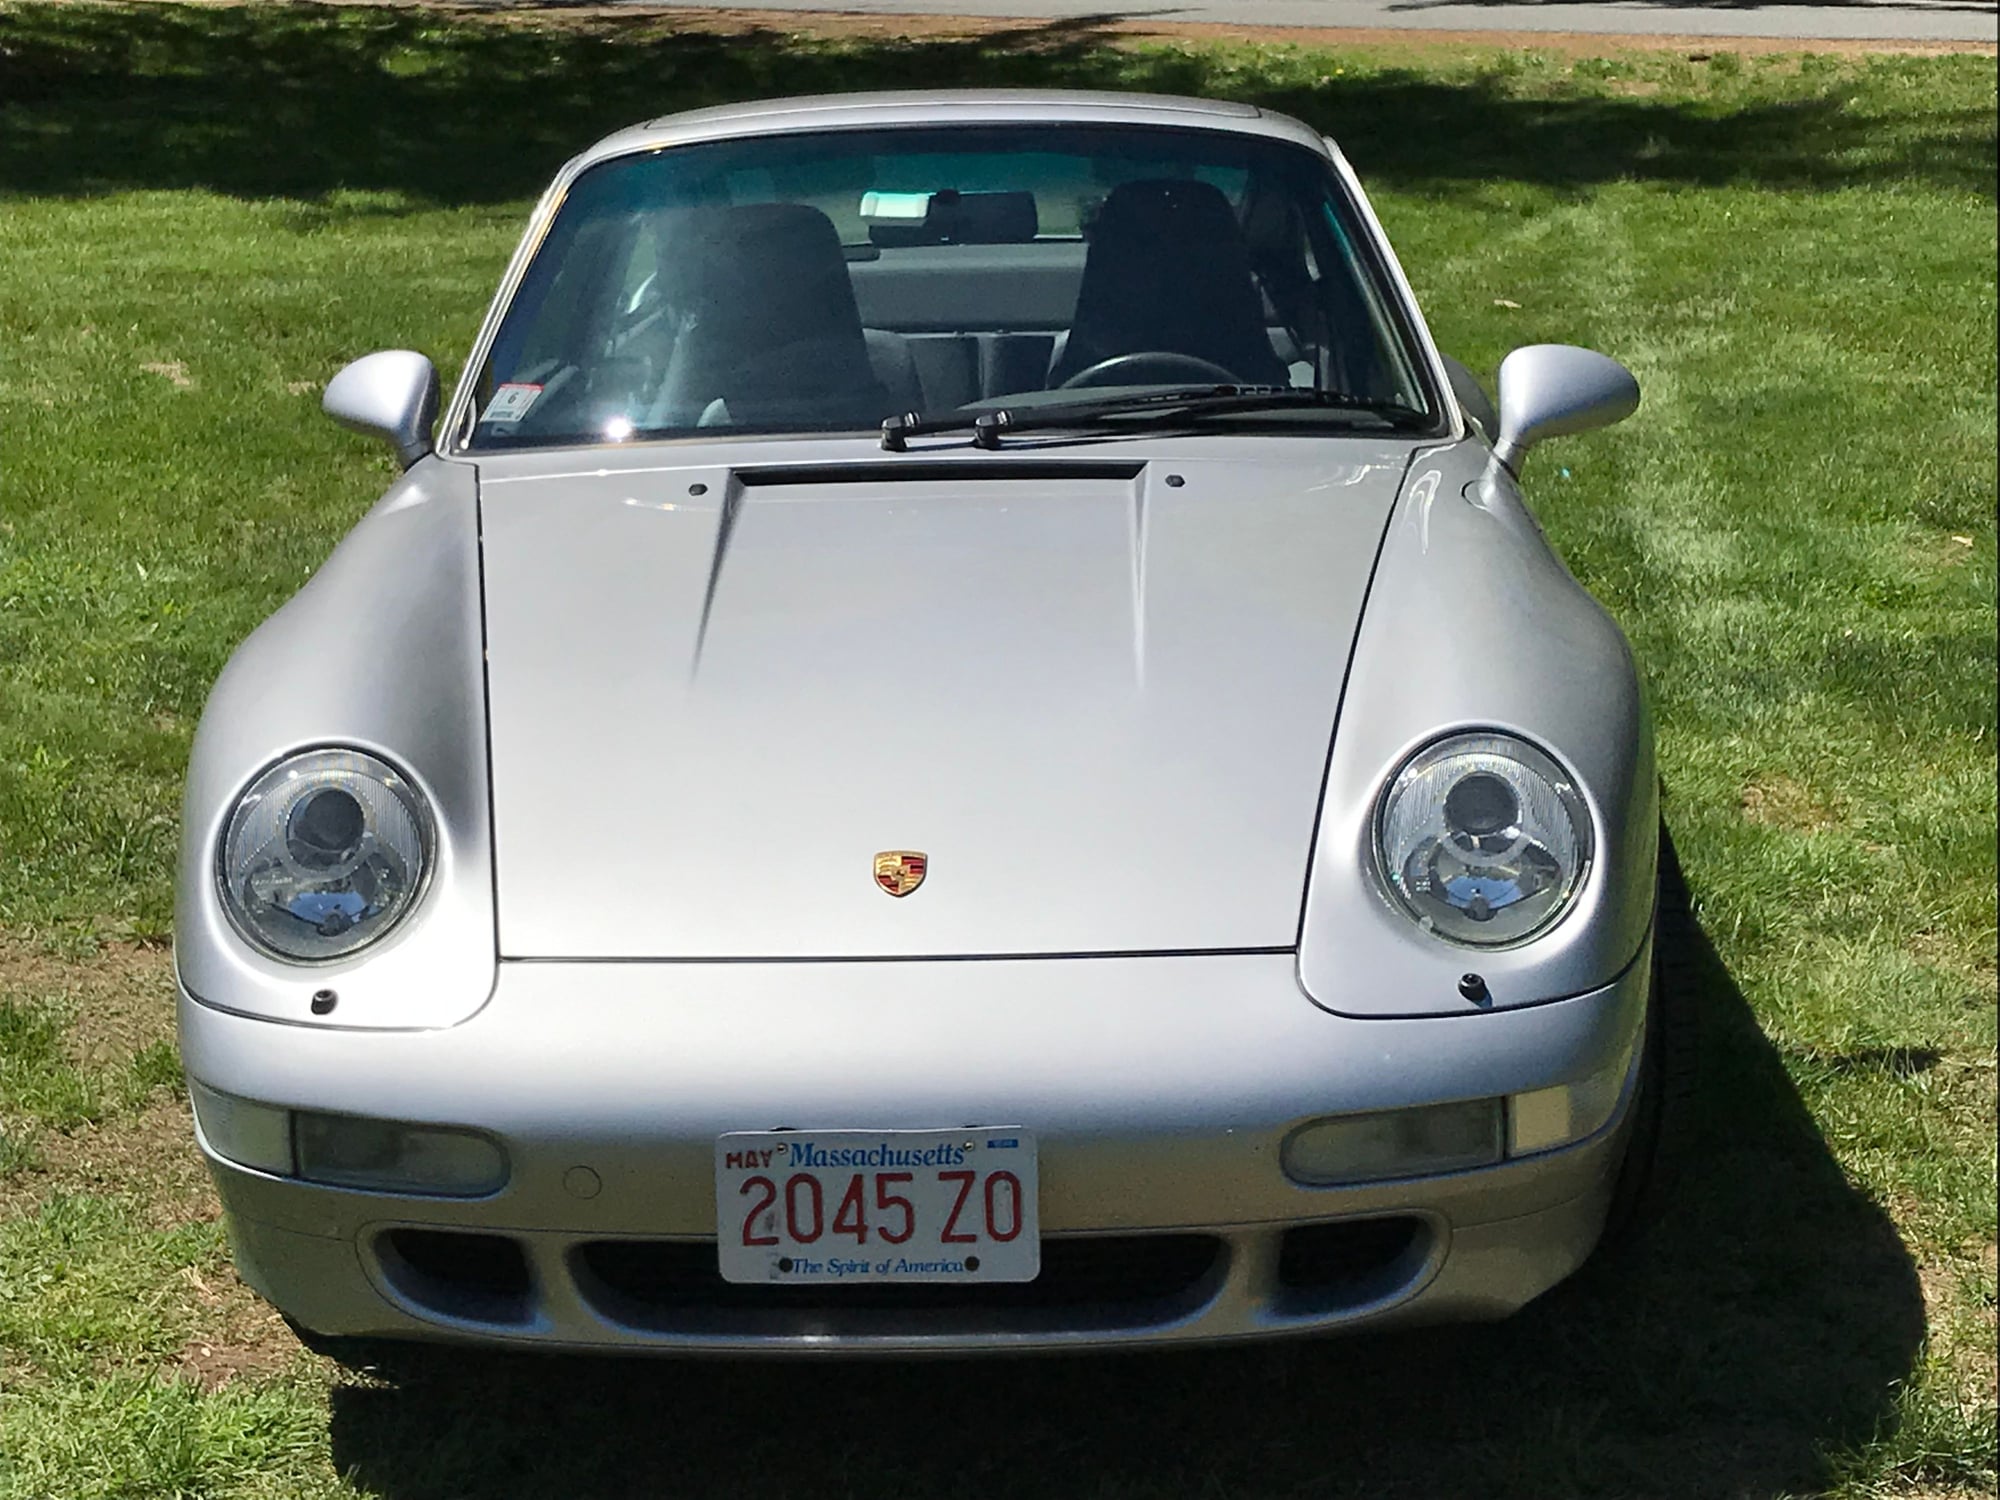 1997 Porsche 911 - 1997 993 C4S wide-body Porsche - Used - VIN wp0aa299iv5321443 - 48,760 Miles - 6 cyl - AWD - Manual - Coupe - Silver - Wellesley, MA 02482, United States